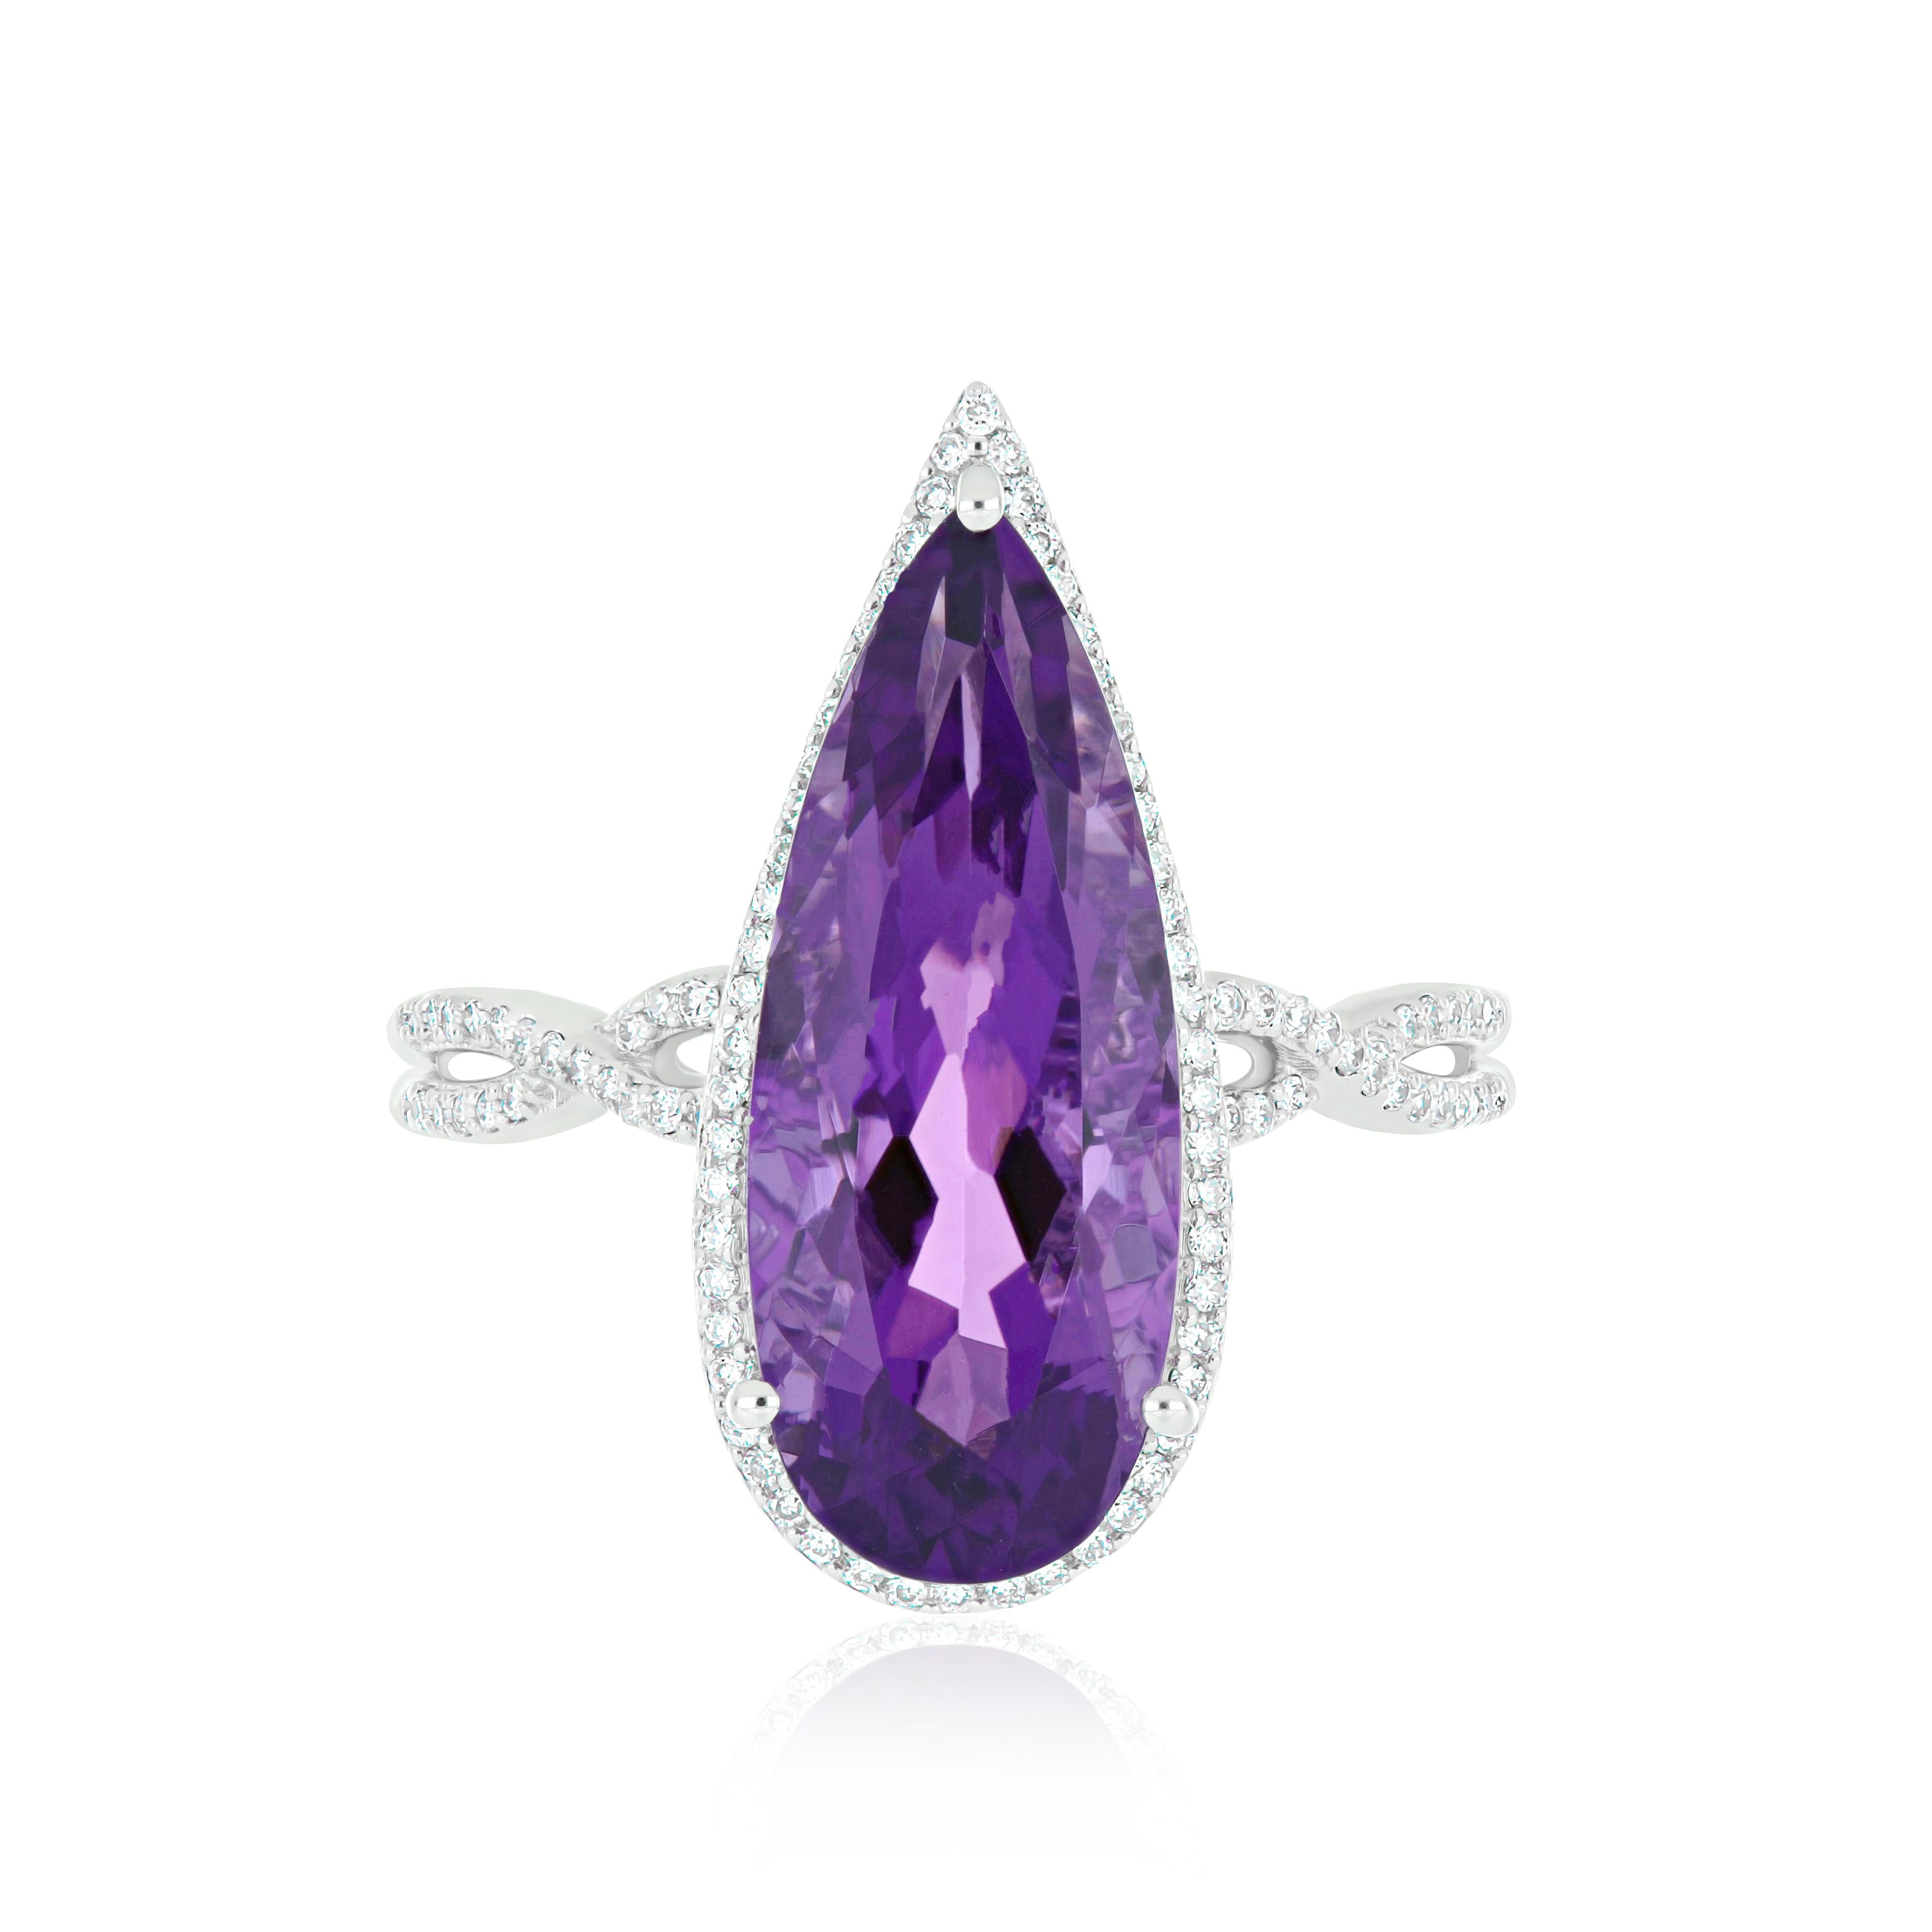 For Sale:  6.11 Carat Amethyst and Diamond Ring in 14 Karat White Gold Ring  7